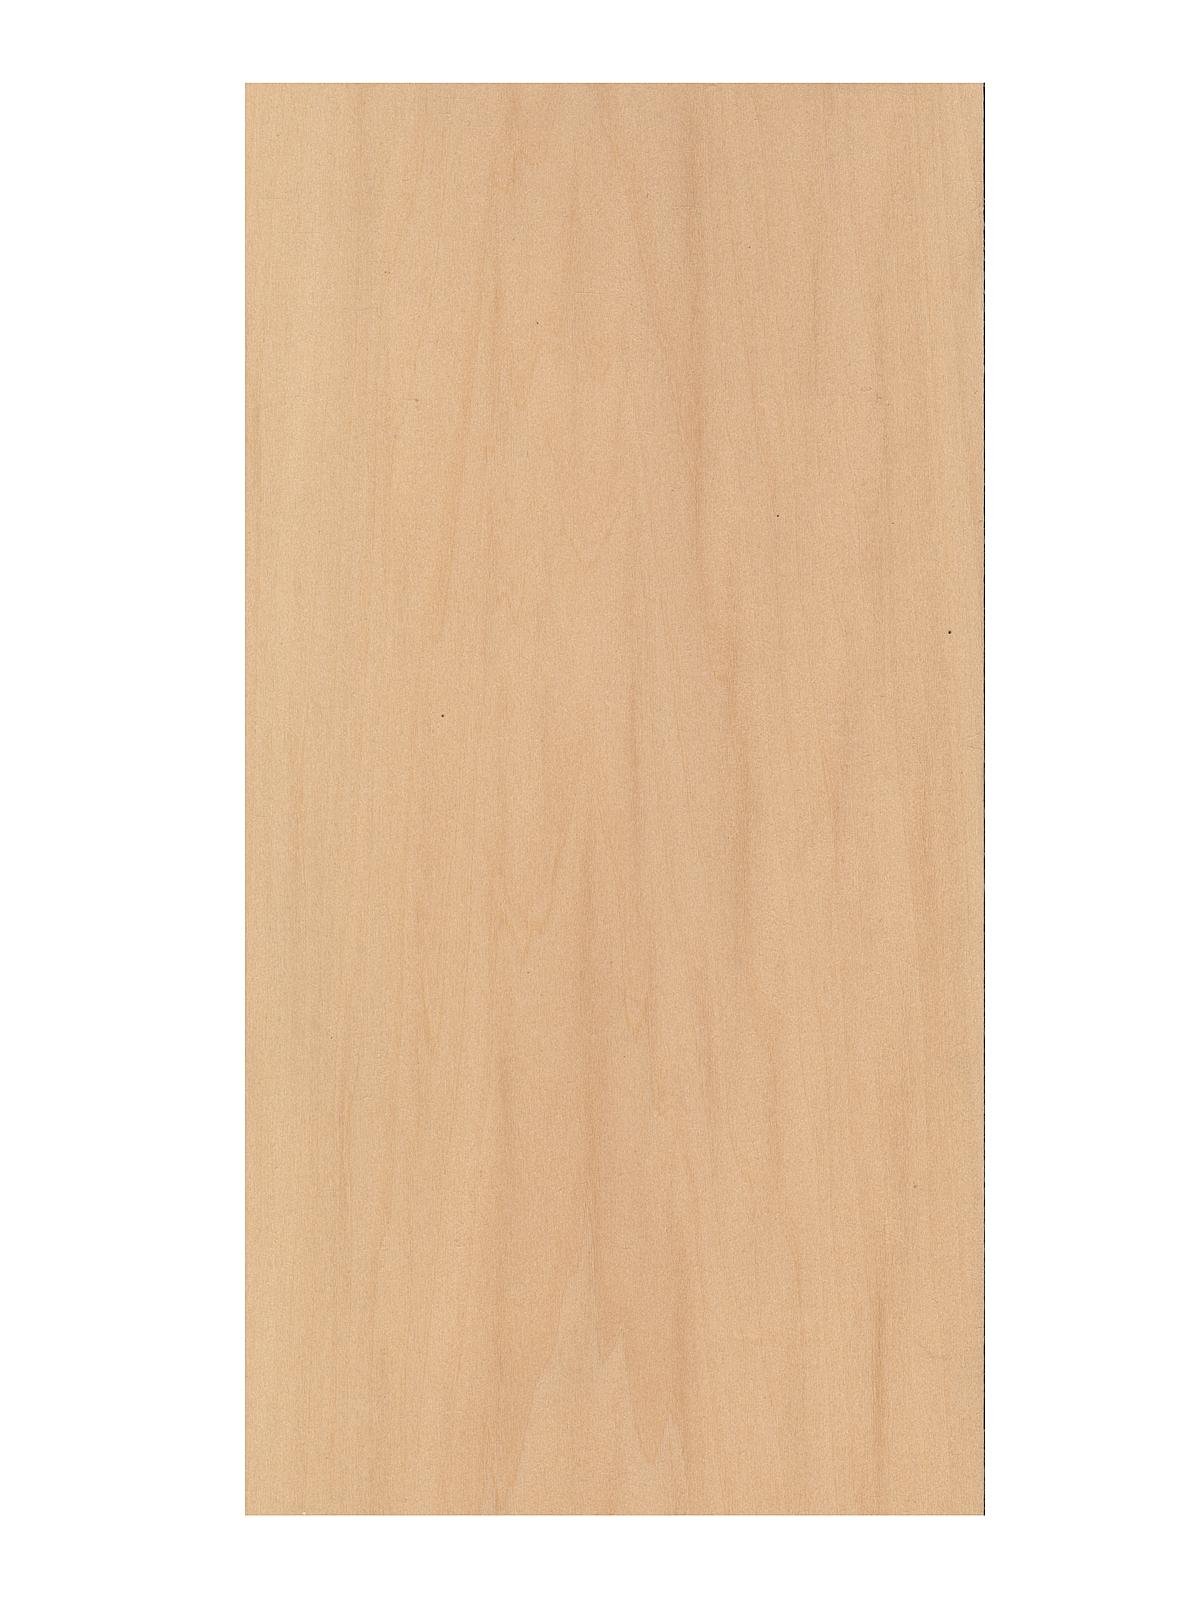 Midwest Products 4130 Basswood Sheet 1/16X8X24